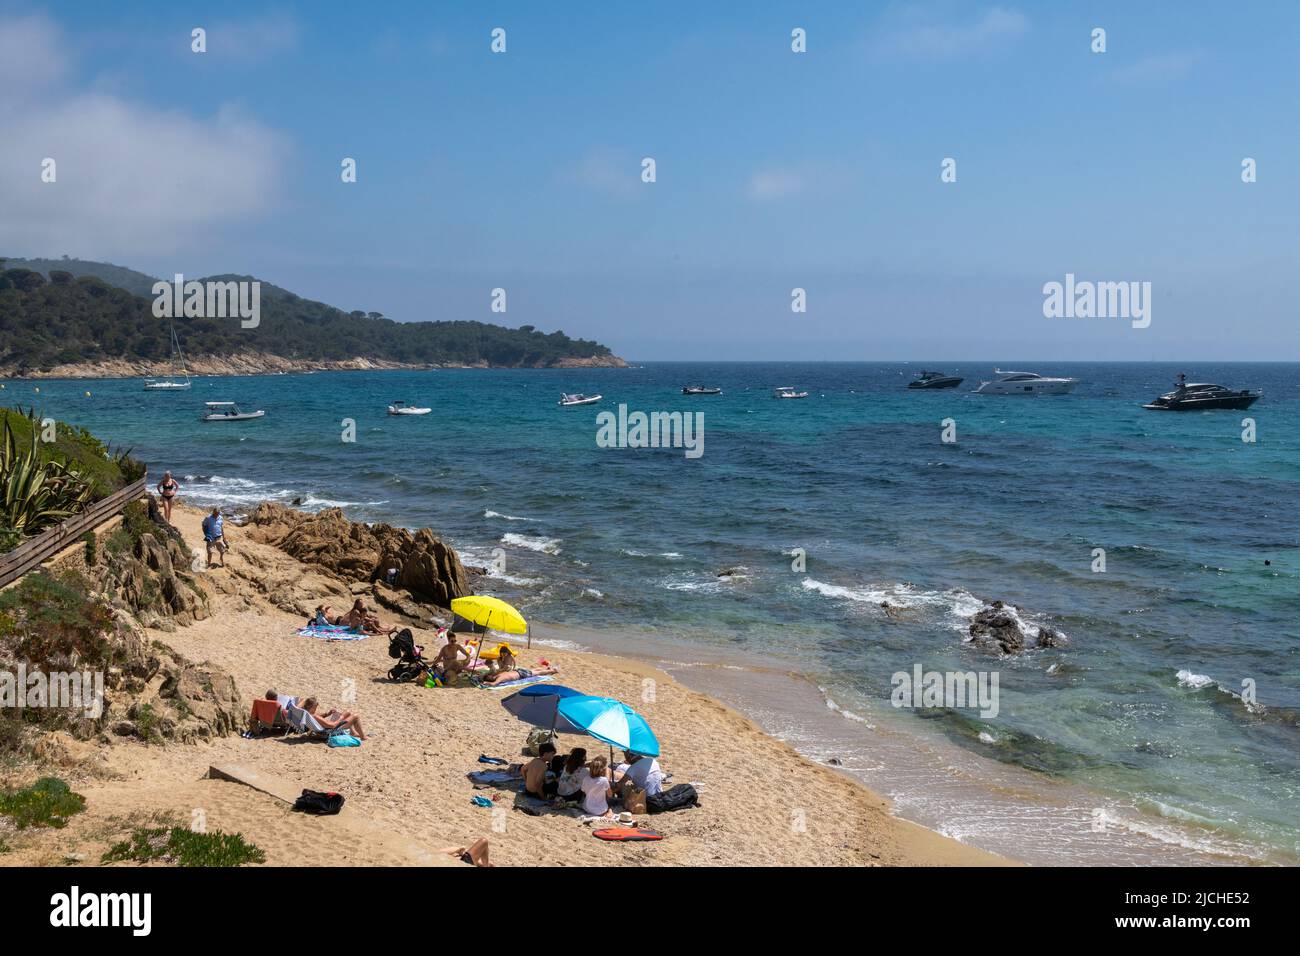 Looking East along Gigaro Beach, Var, Provence-Alpes-Cote-D'Azur, France. Stock Photo